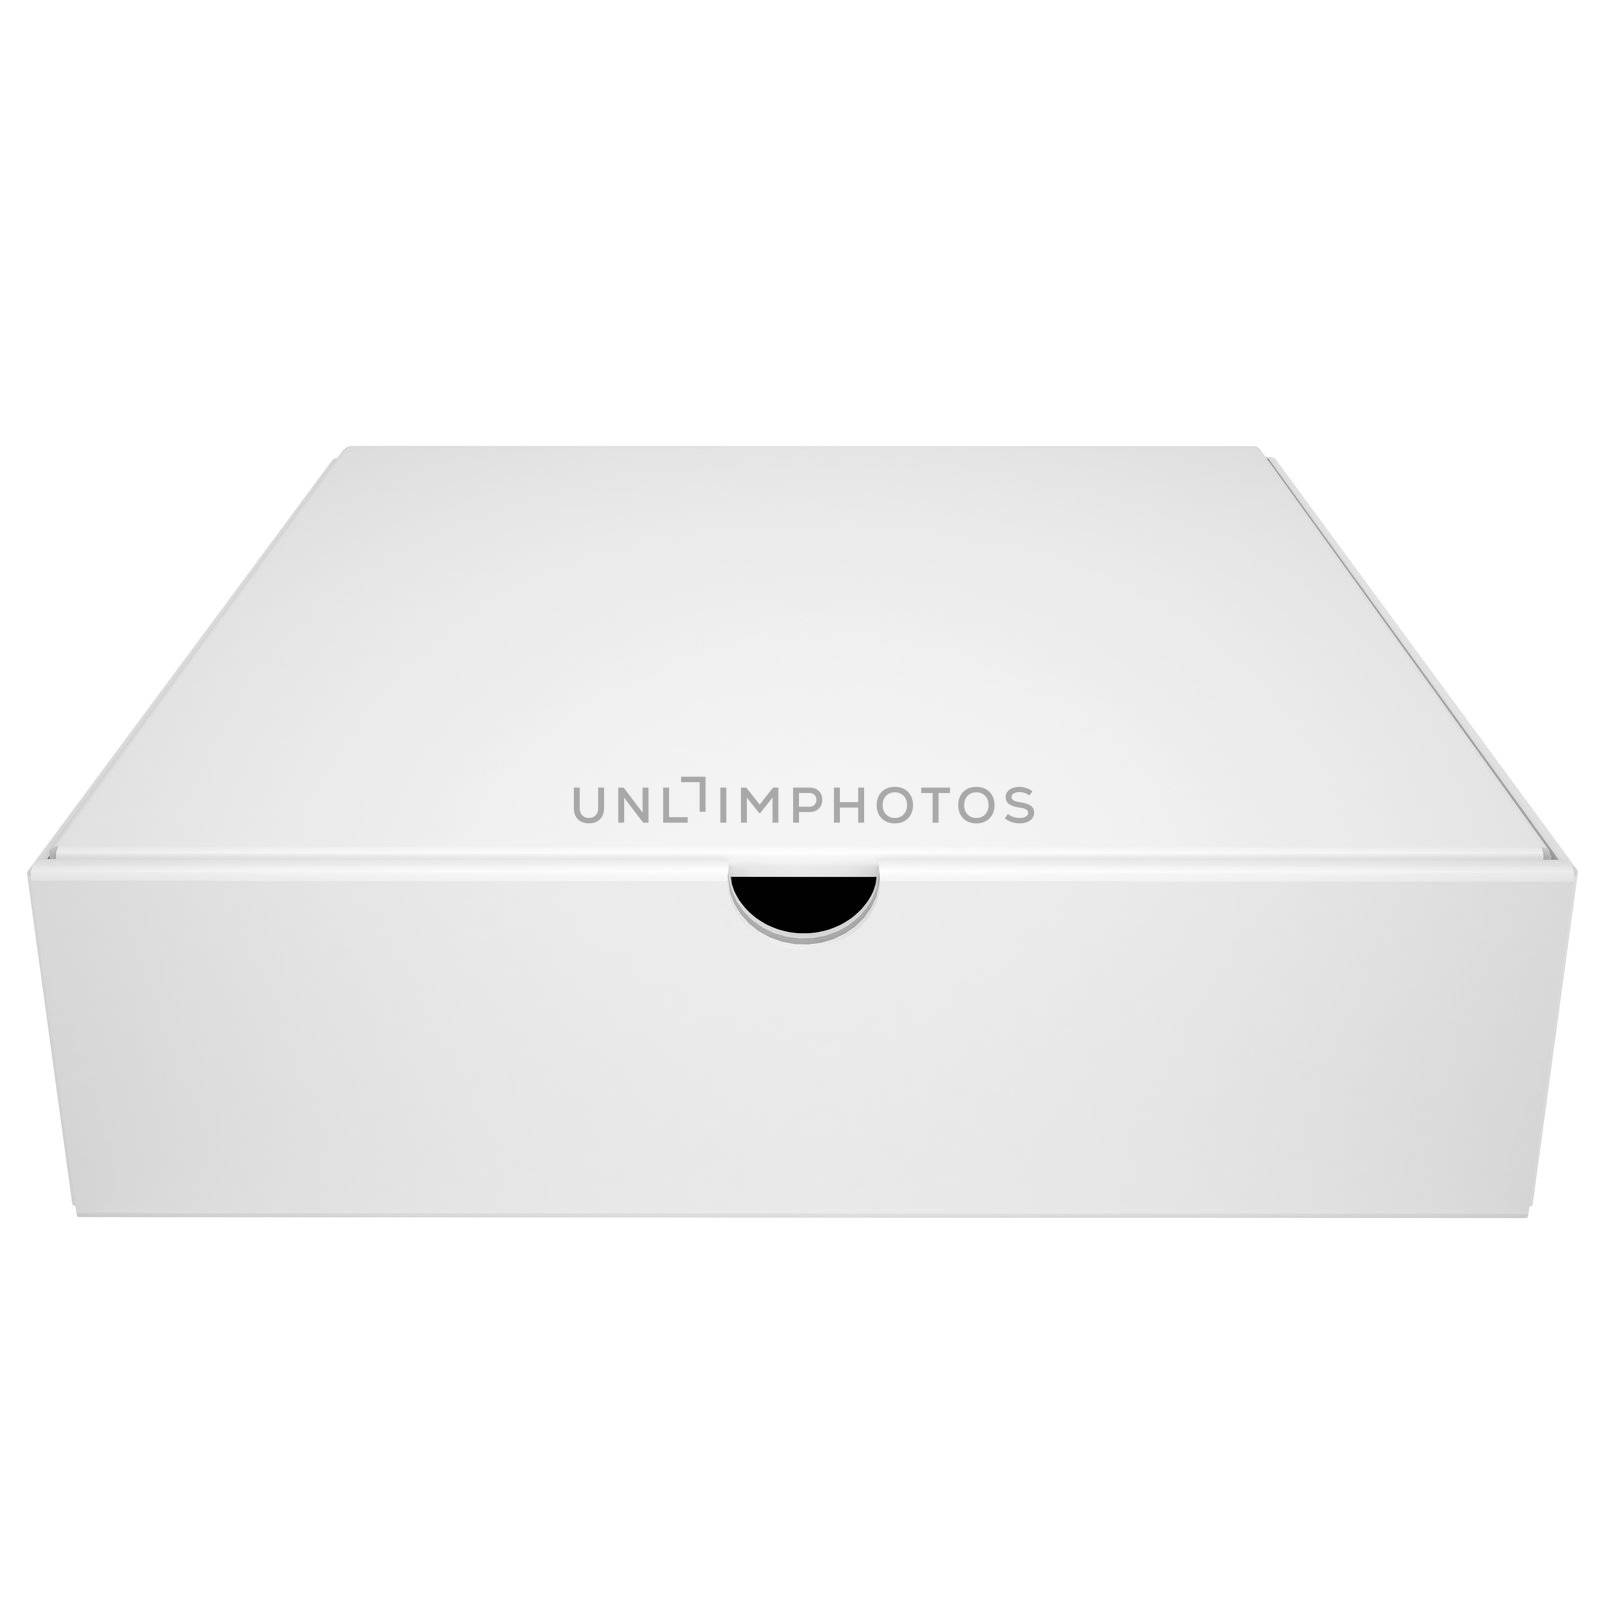 Closed box from under the pizza. Isolated render on a white background